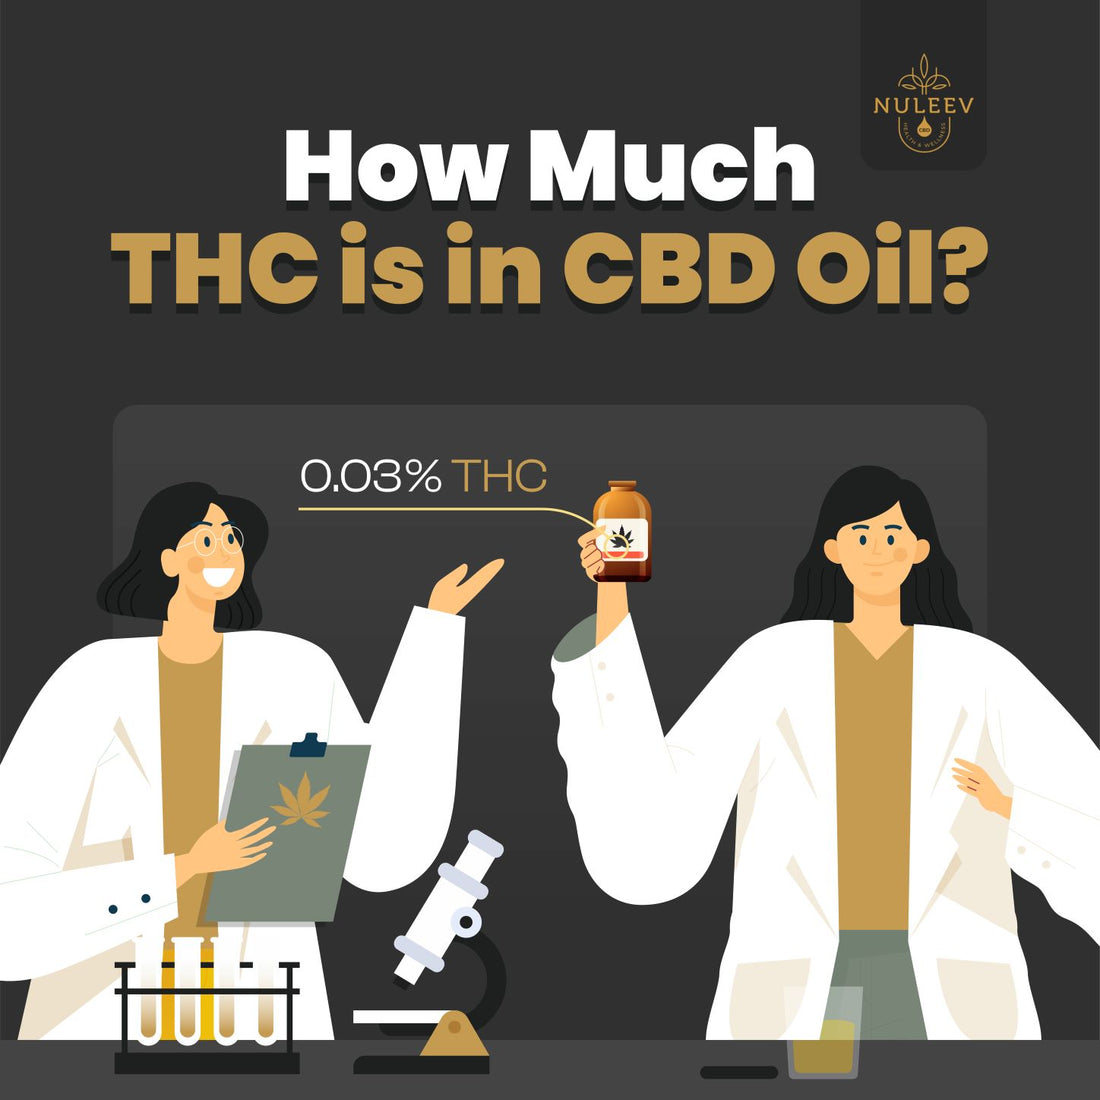 how much thc is in cbd oil?